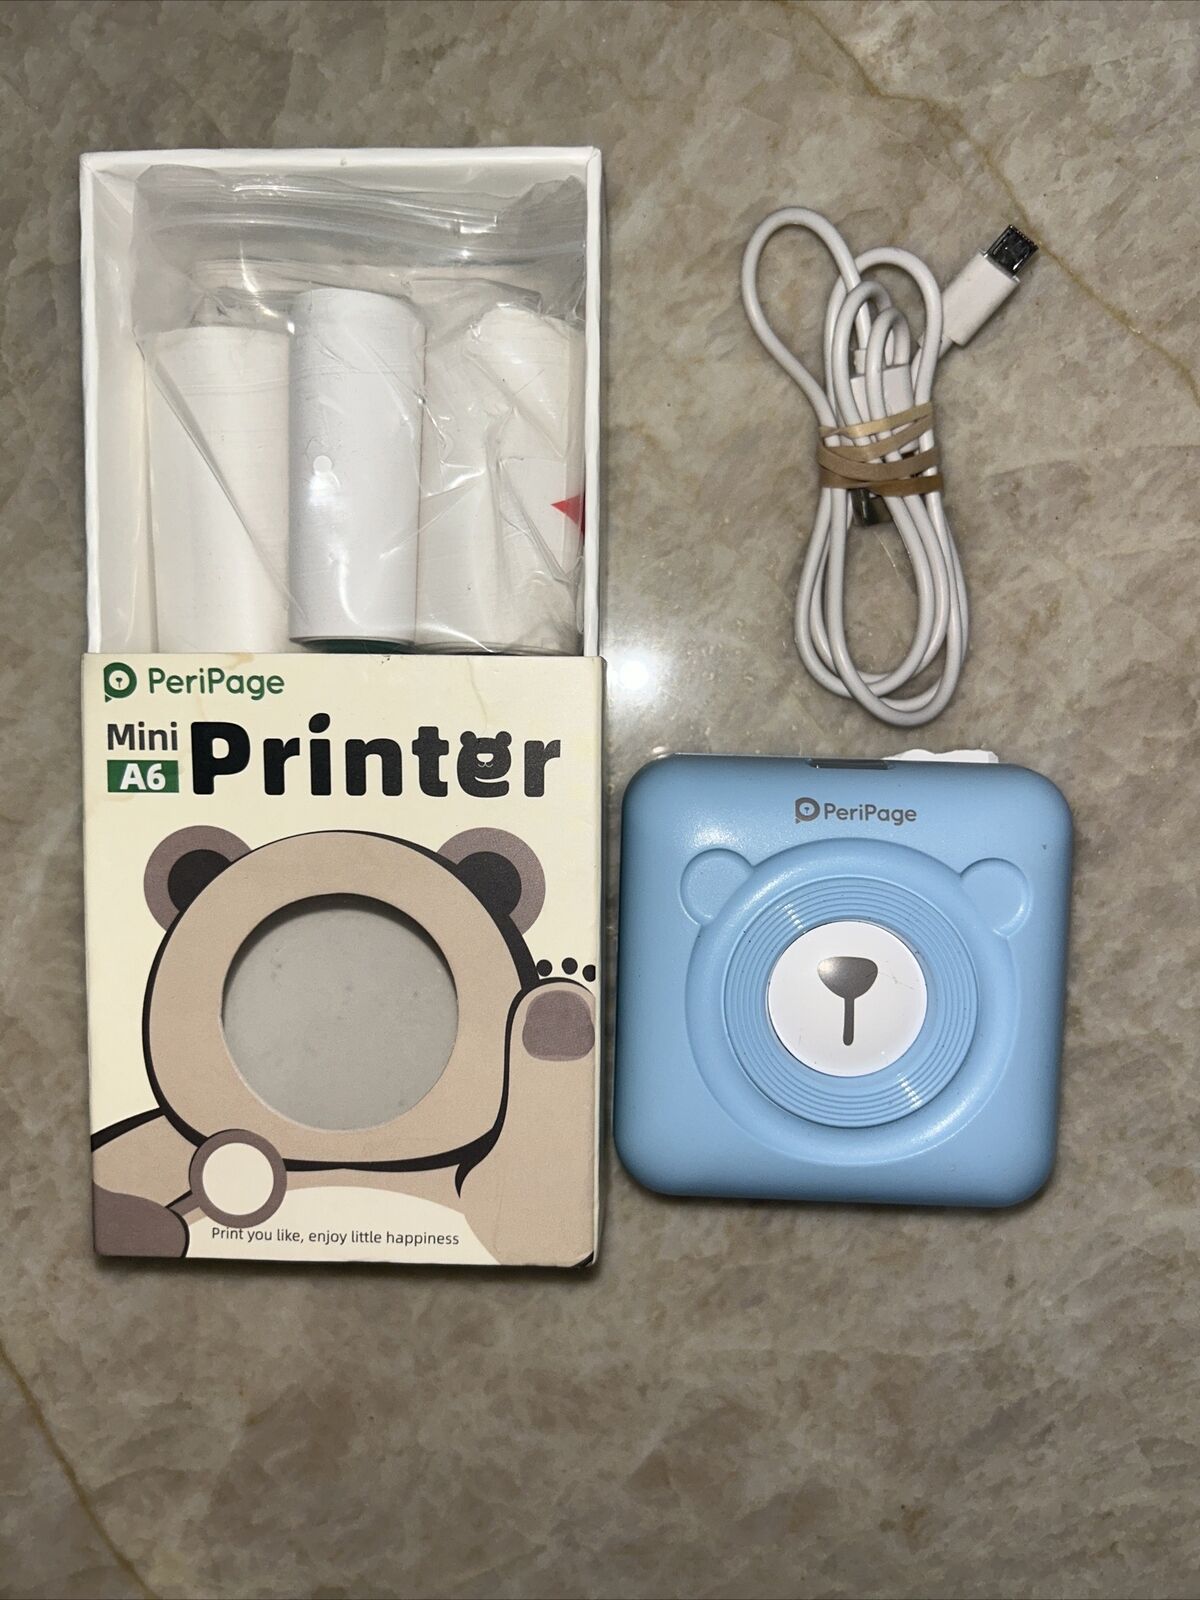 PeriPage Mini A6 Printer Wireless Portable Thermal Bluetooth With Paper